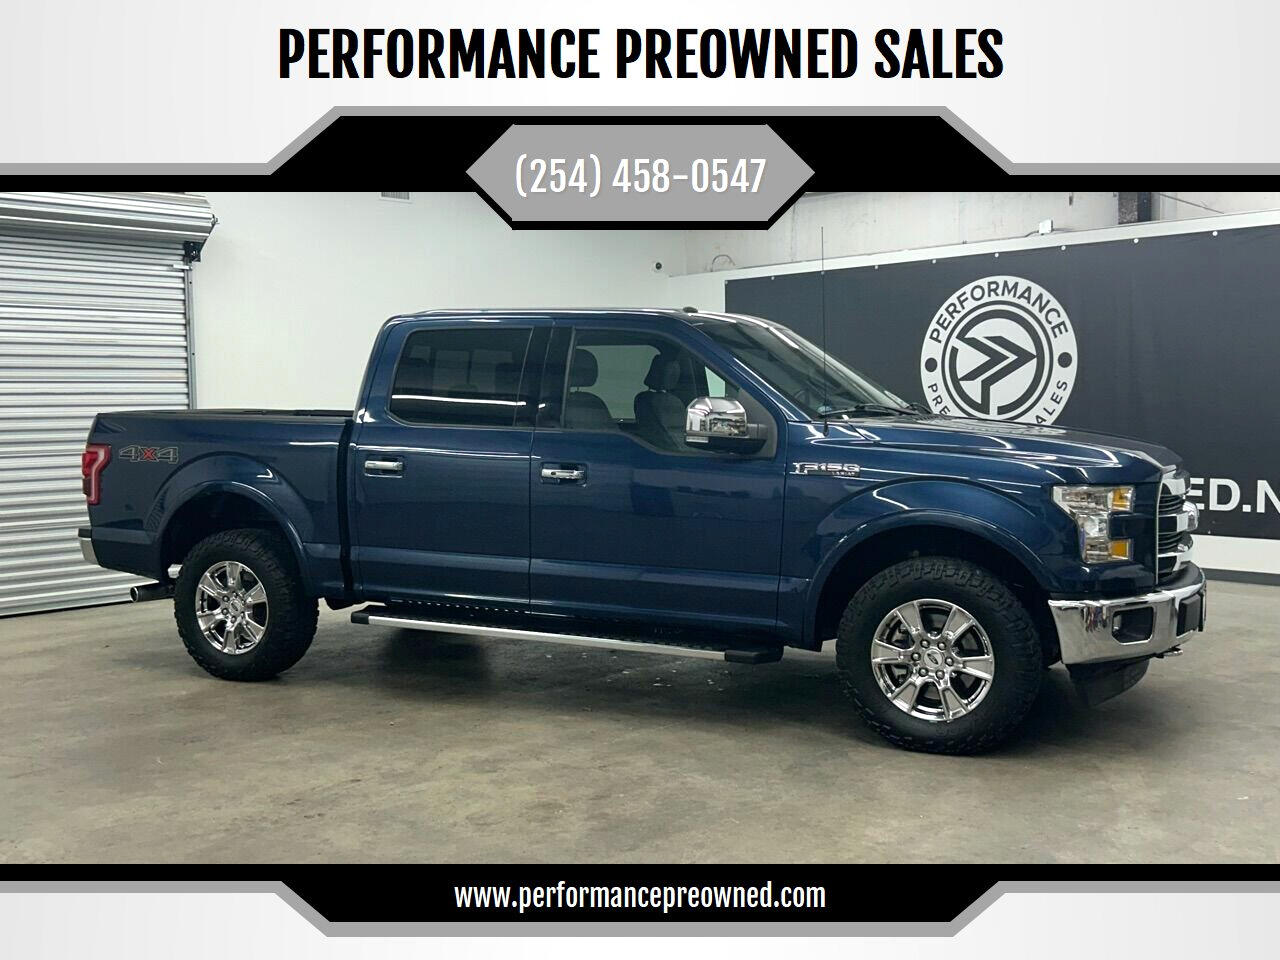 2017 Ford F-150 Lariat SuperCrew 5.5-ft. Bed 4WD